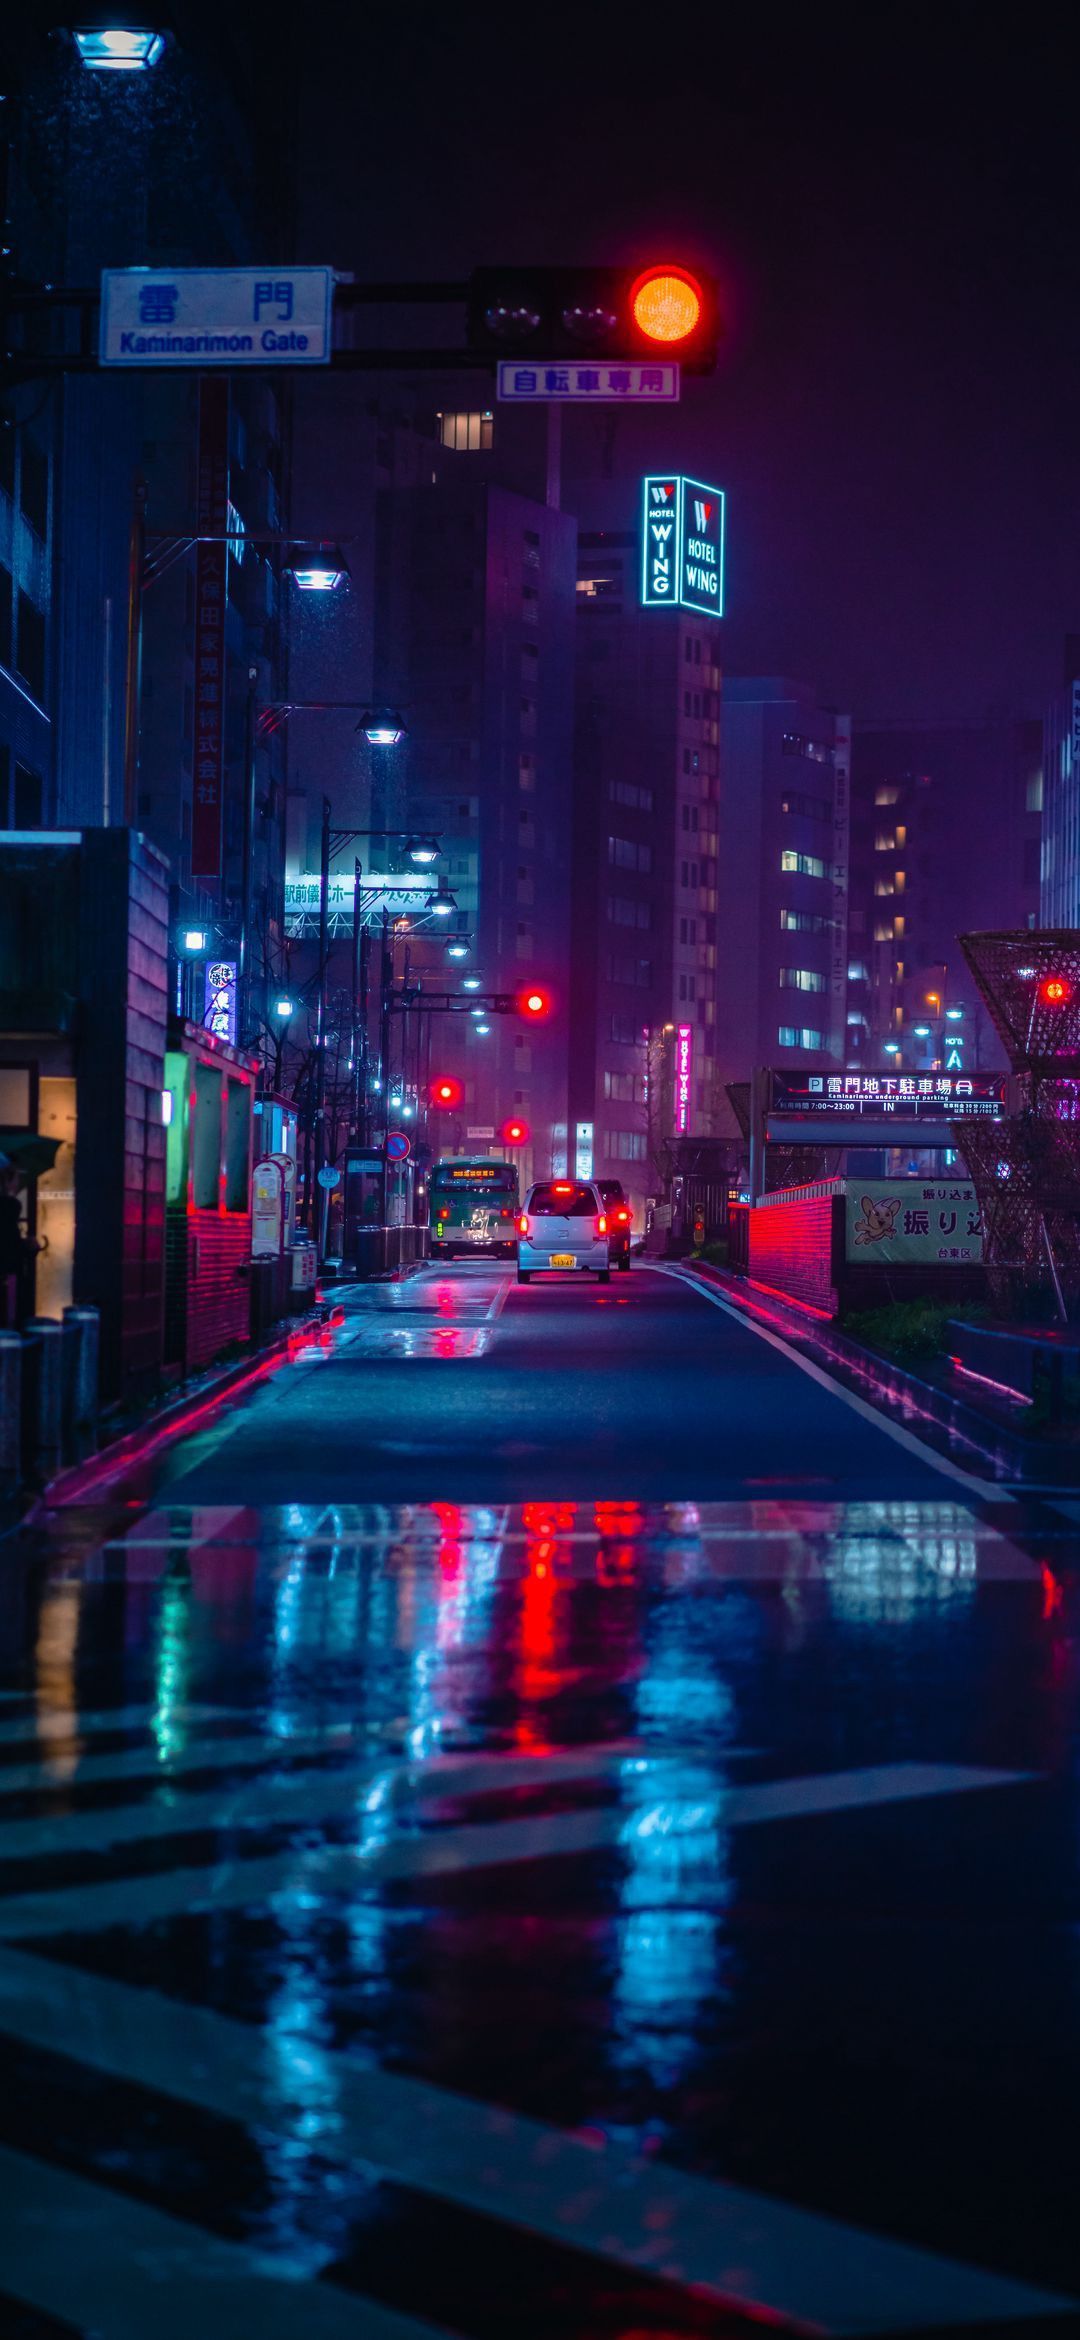 A city street at night with lights on - Cyberpunk